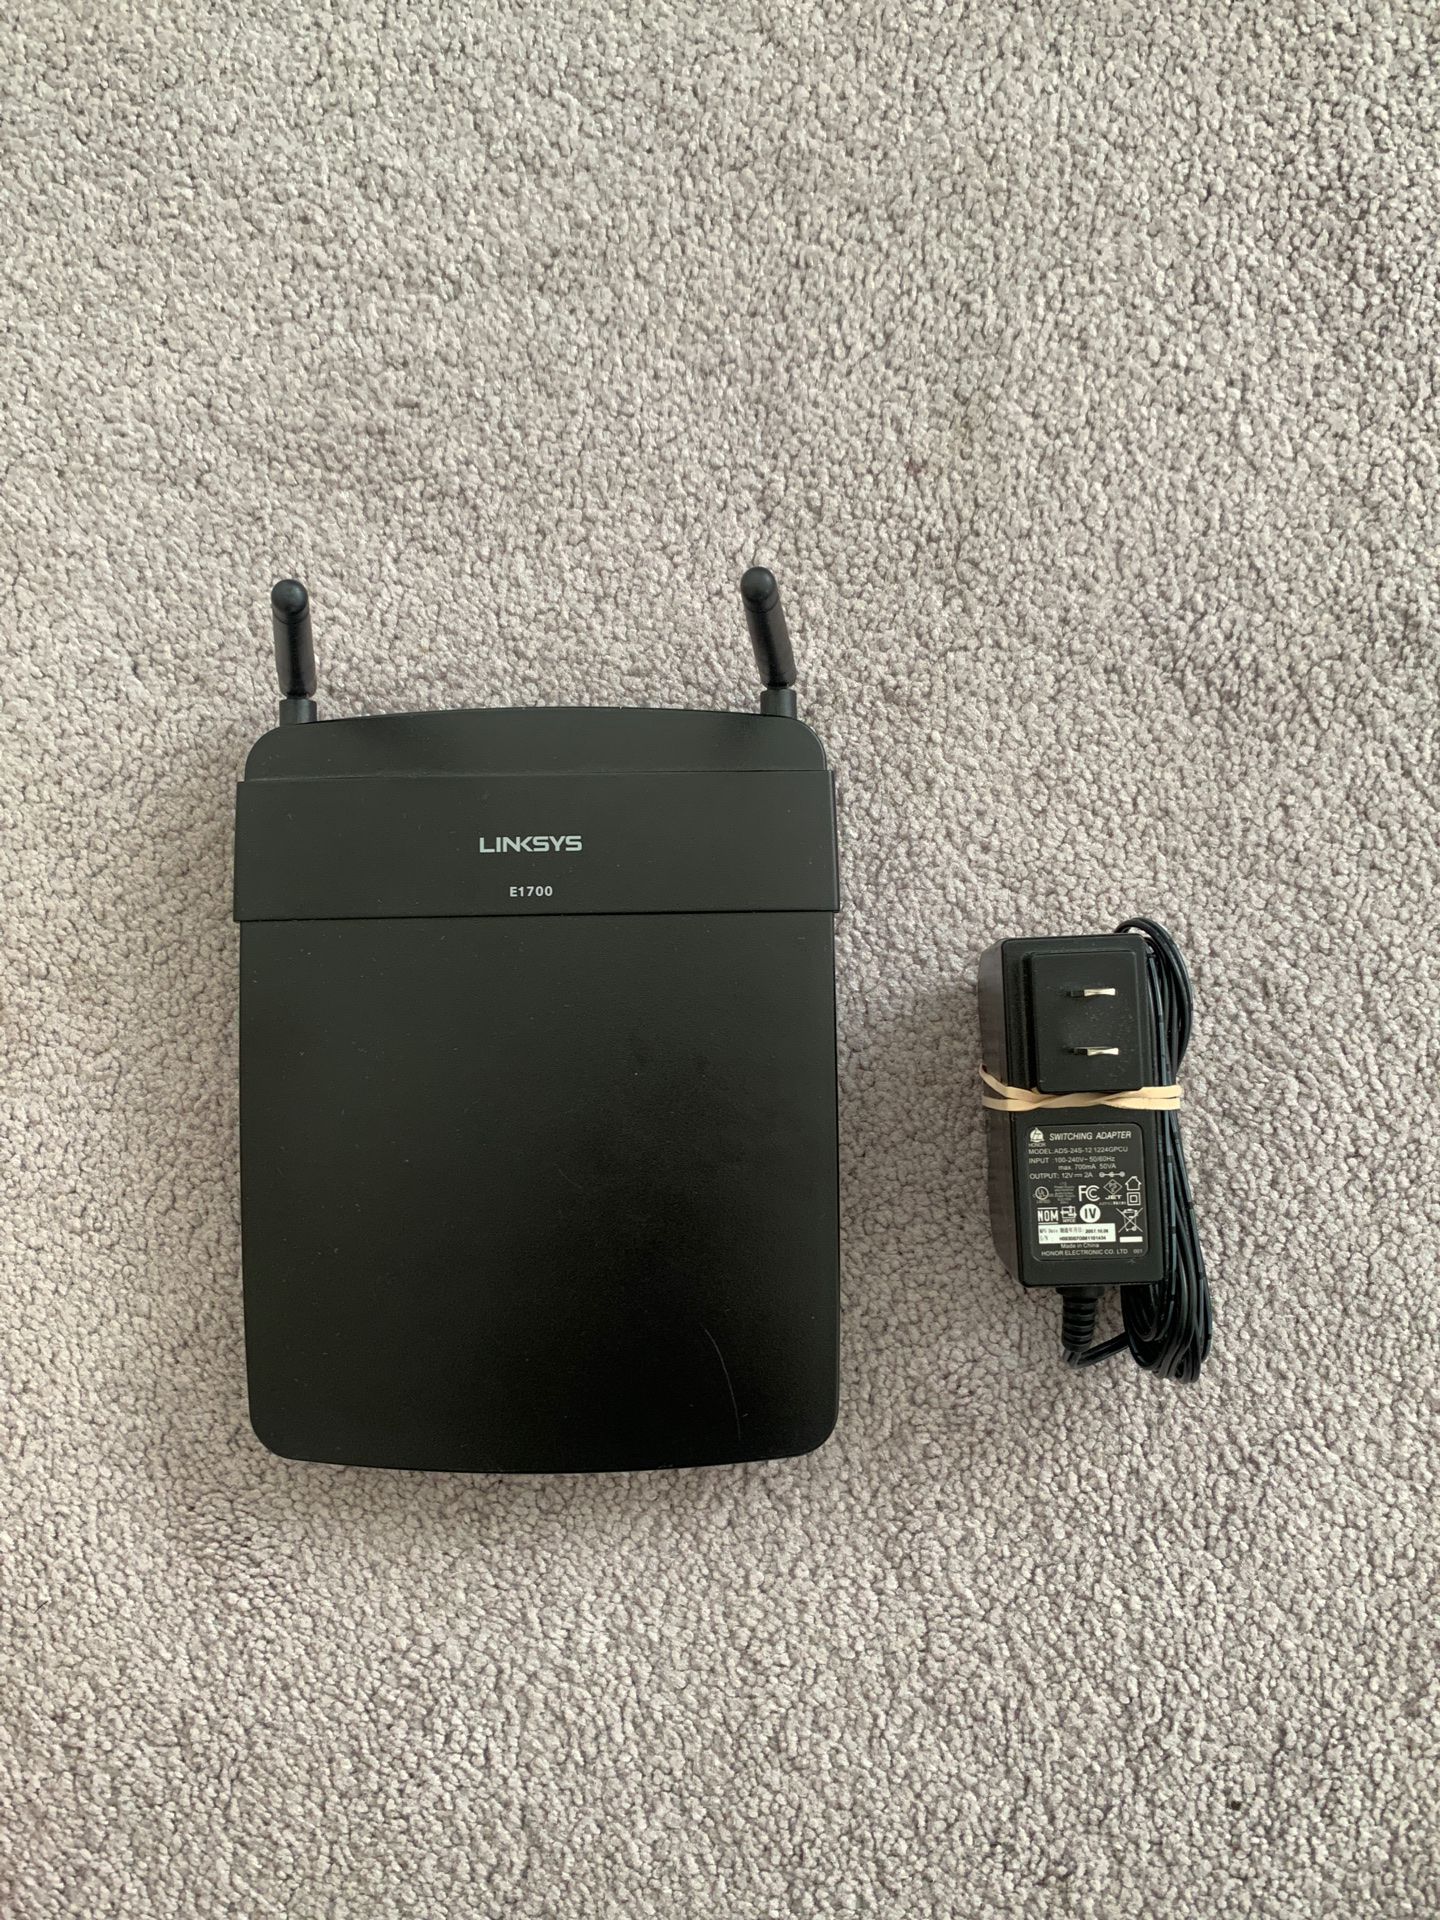 Linksys E1700 Router